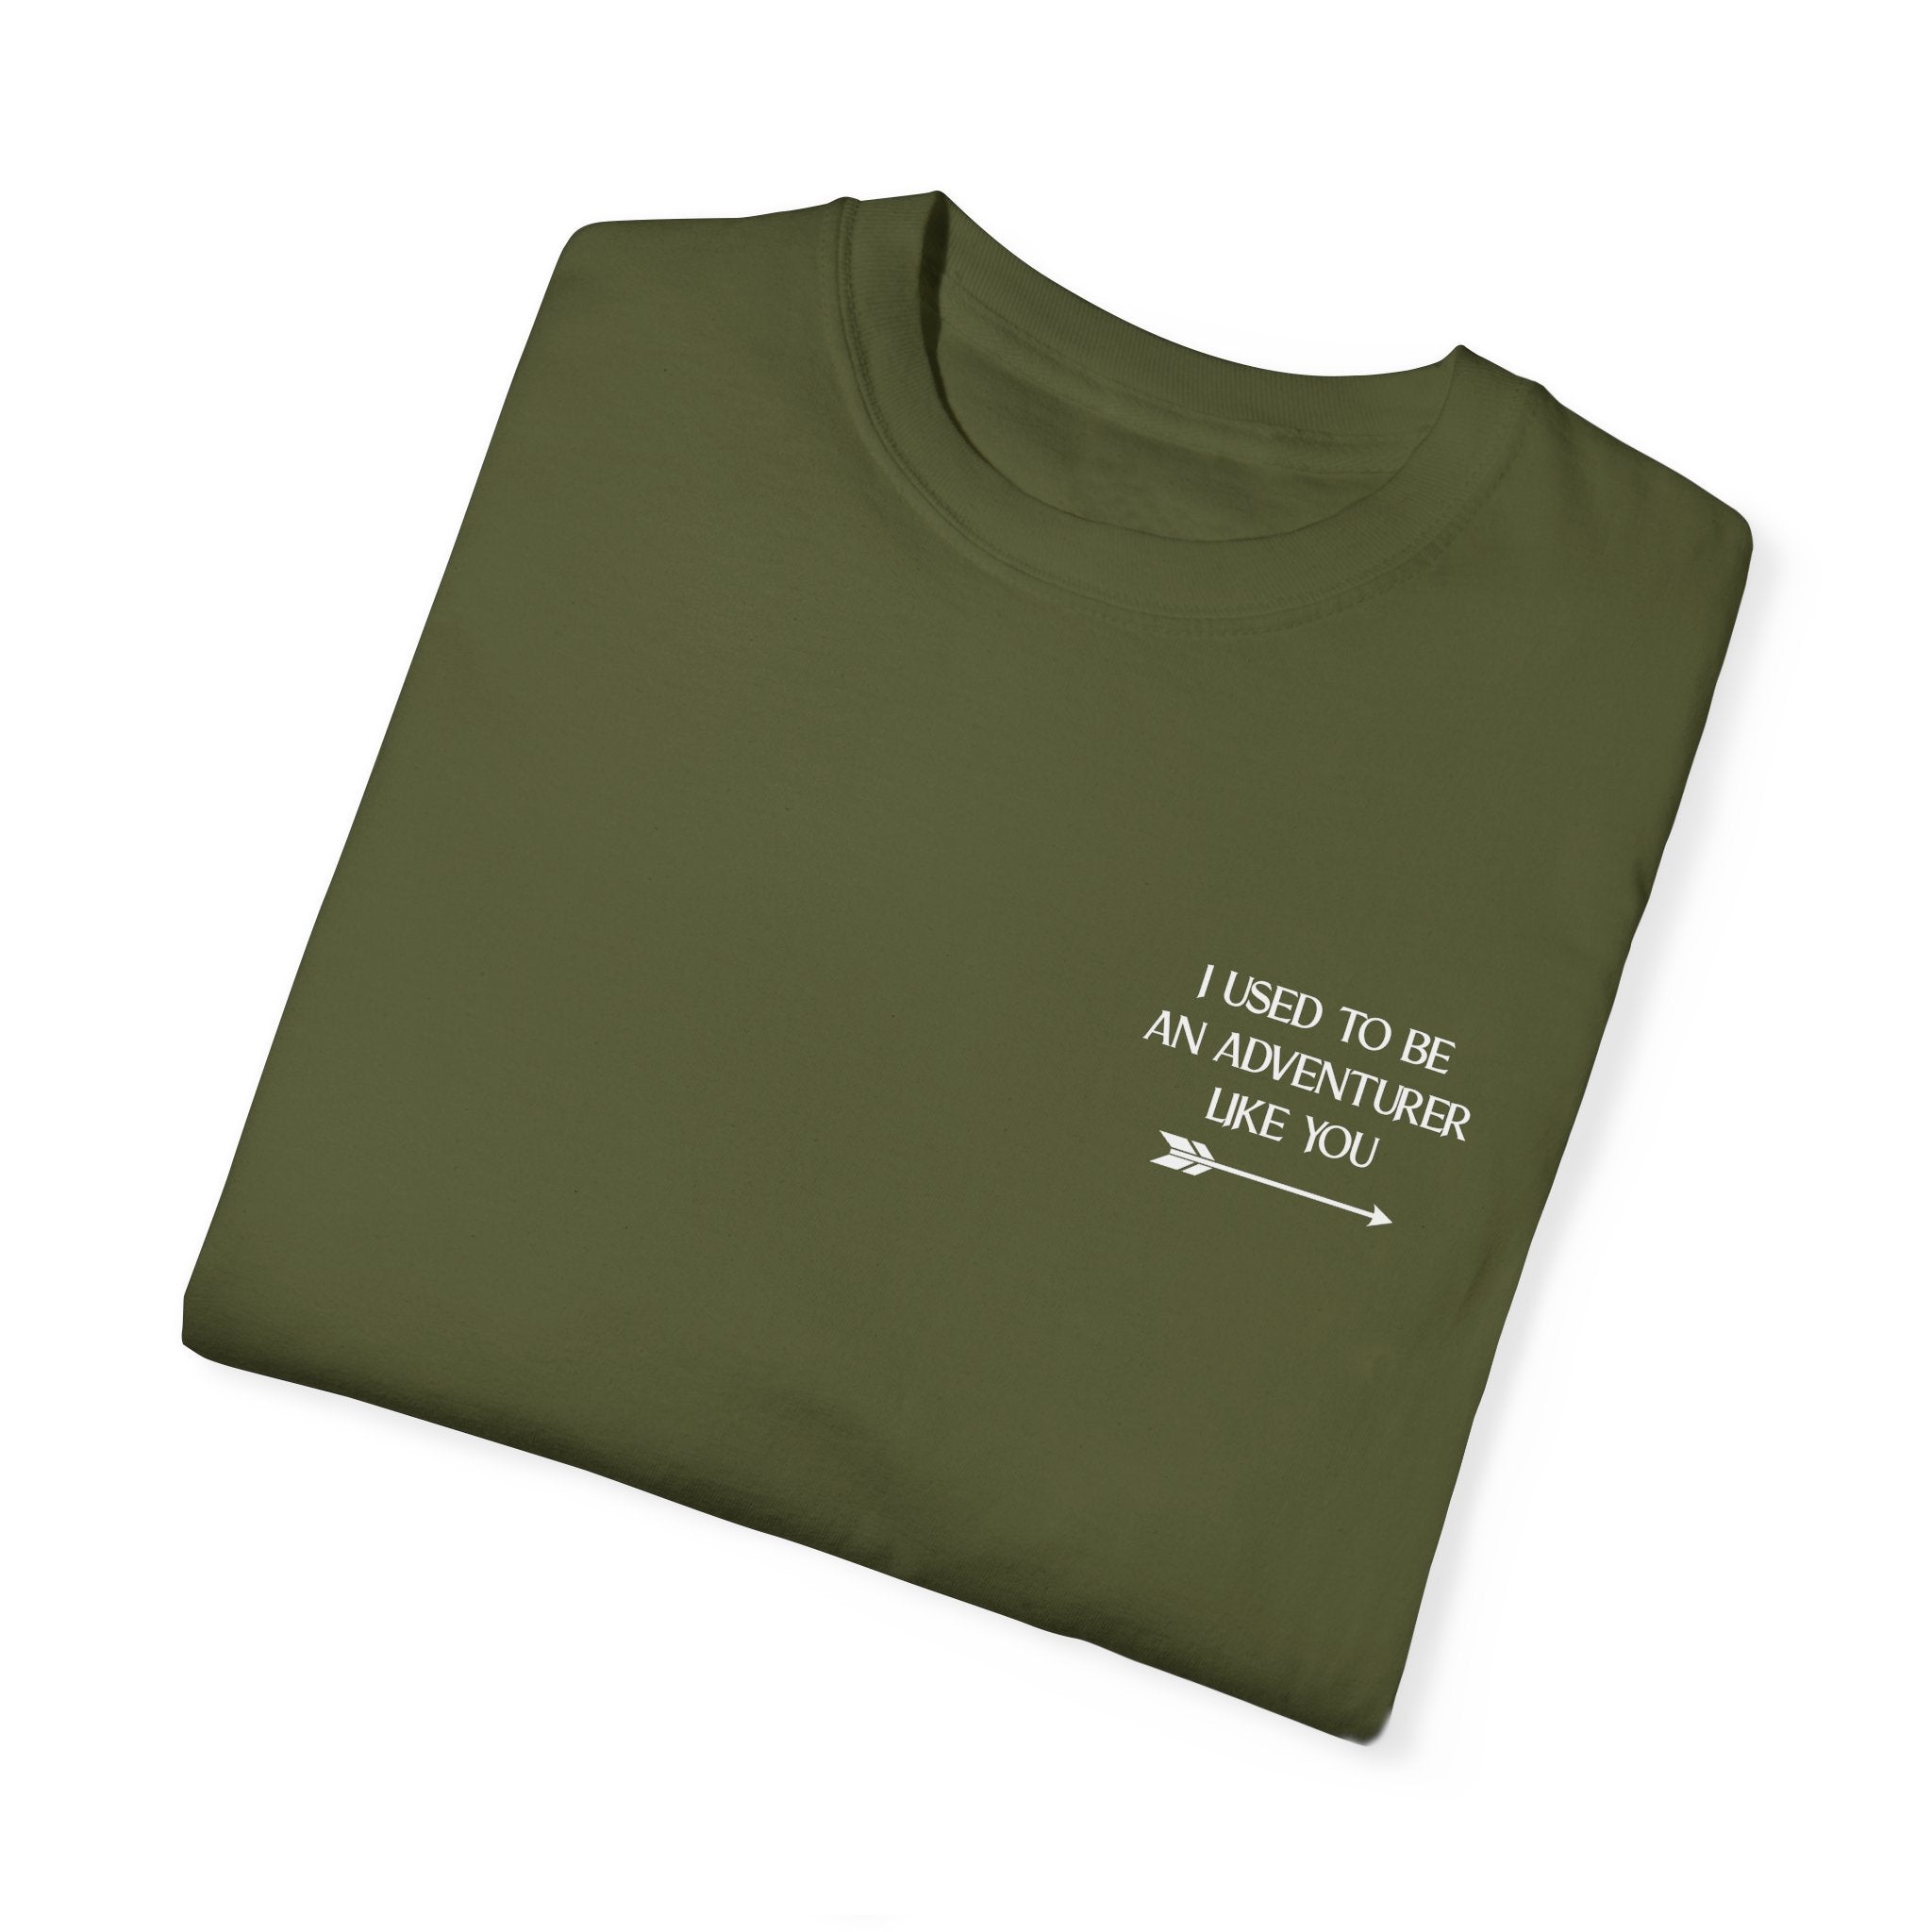 I Used to be an Adventurer - Comfort Colors 1717 T-shirt